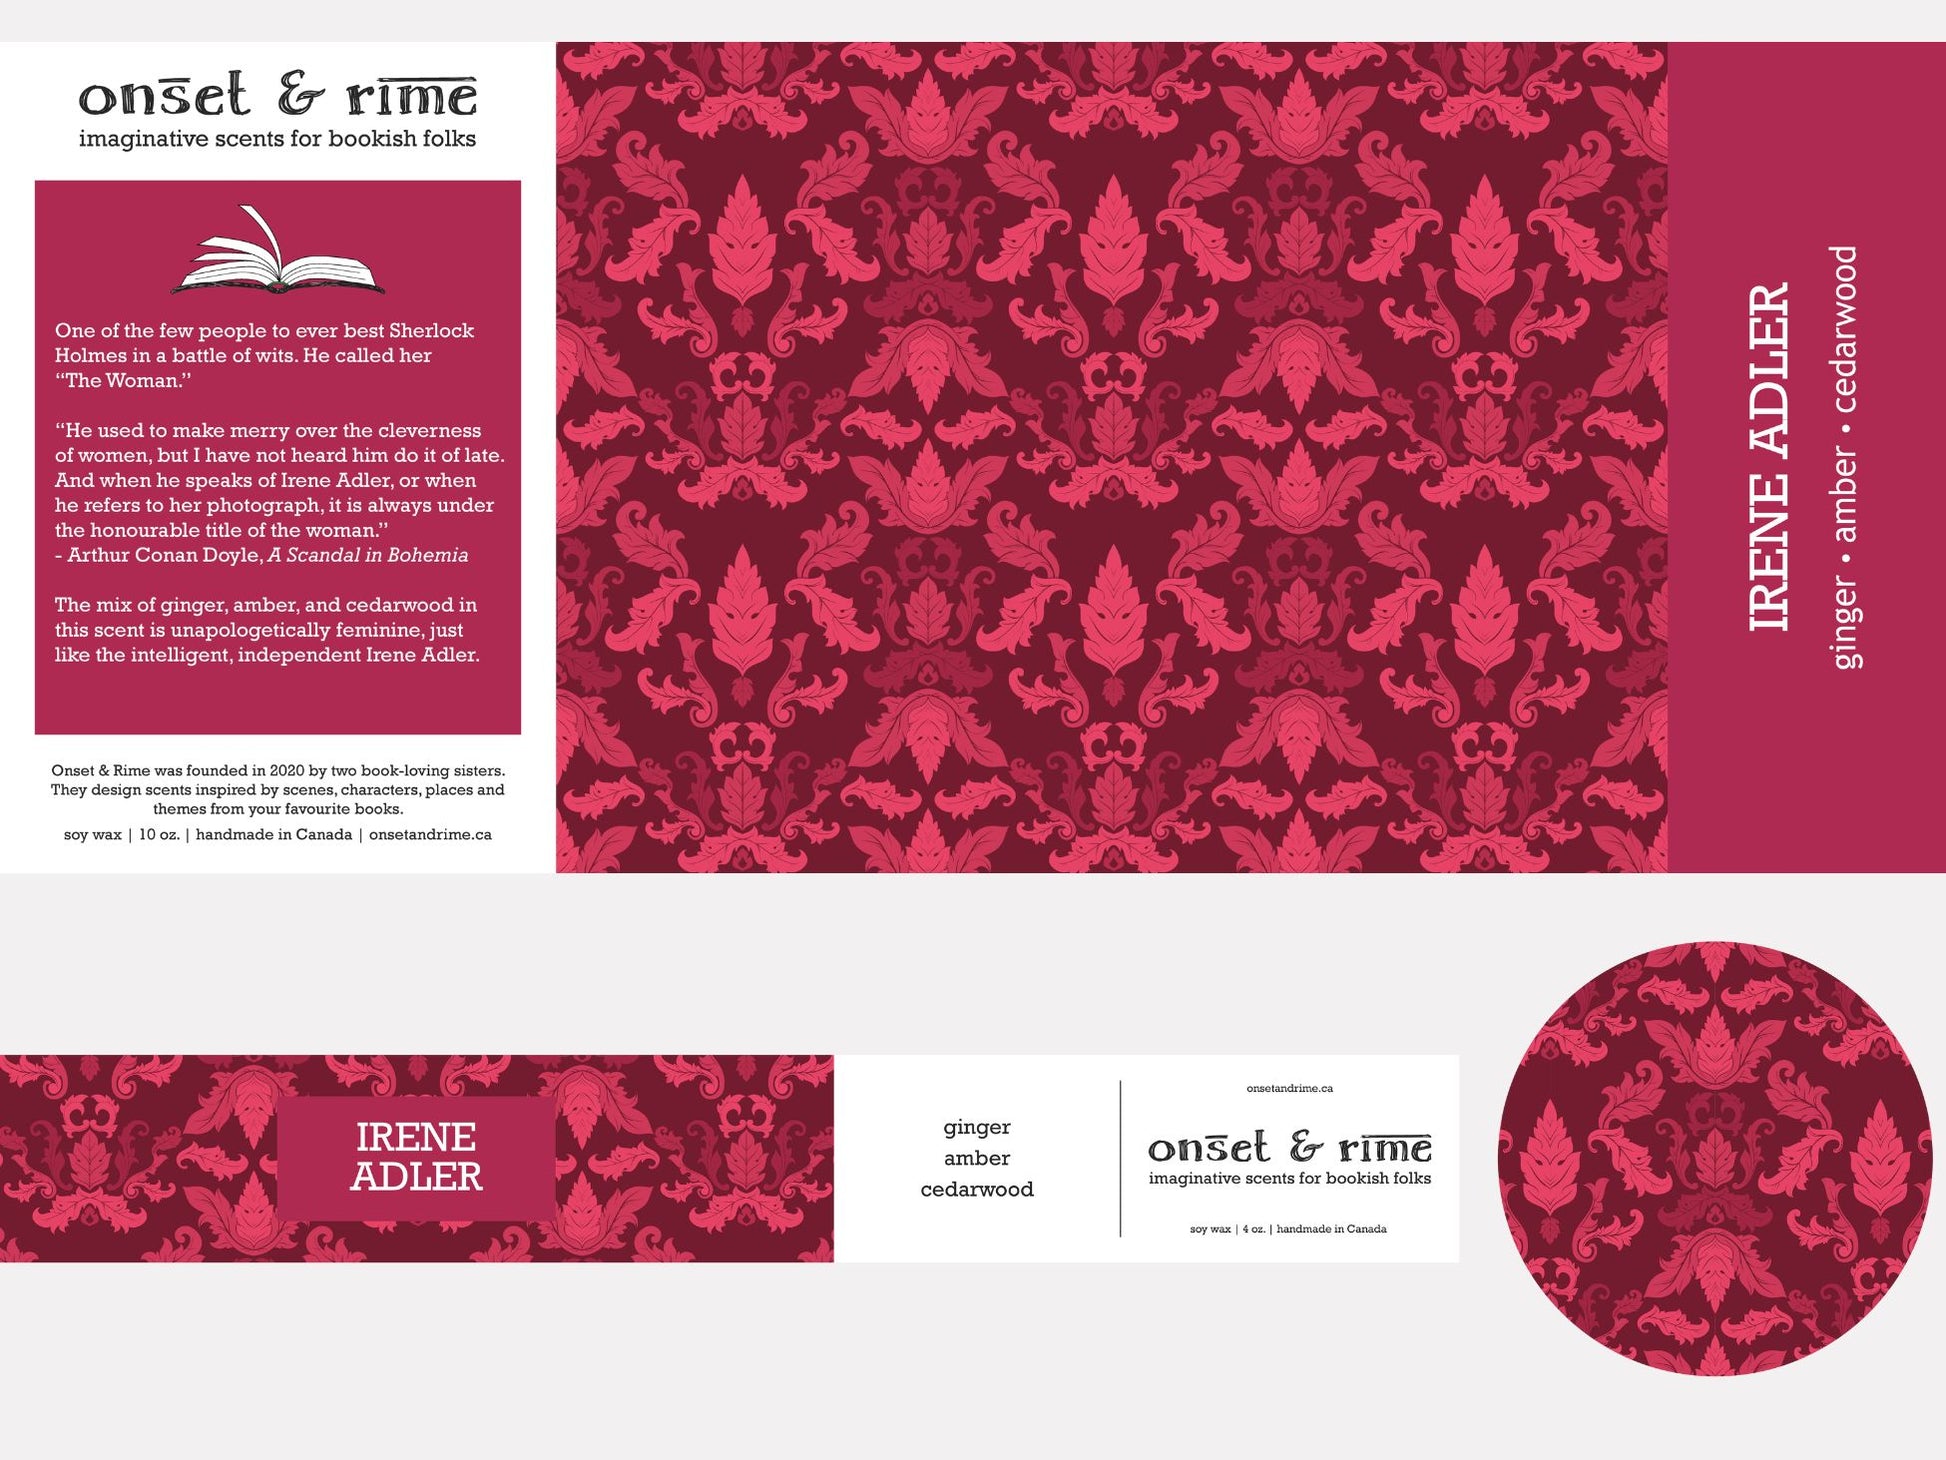 A close up view of the label for the Onset & Rime ginger and amber scented candle called "Irene Adler". The label is a deep red Victorian pattern. The text on the label is "Irene Adler - Ginger, Amber, Cedarwood".